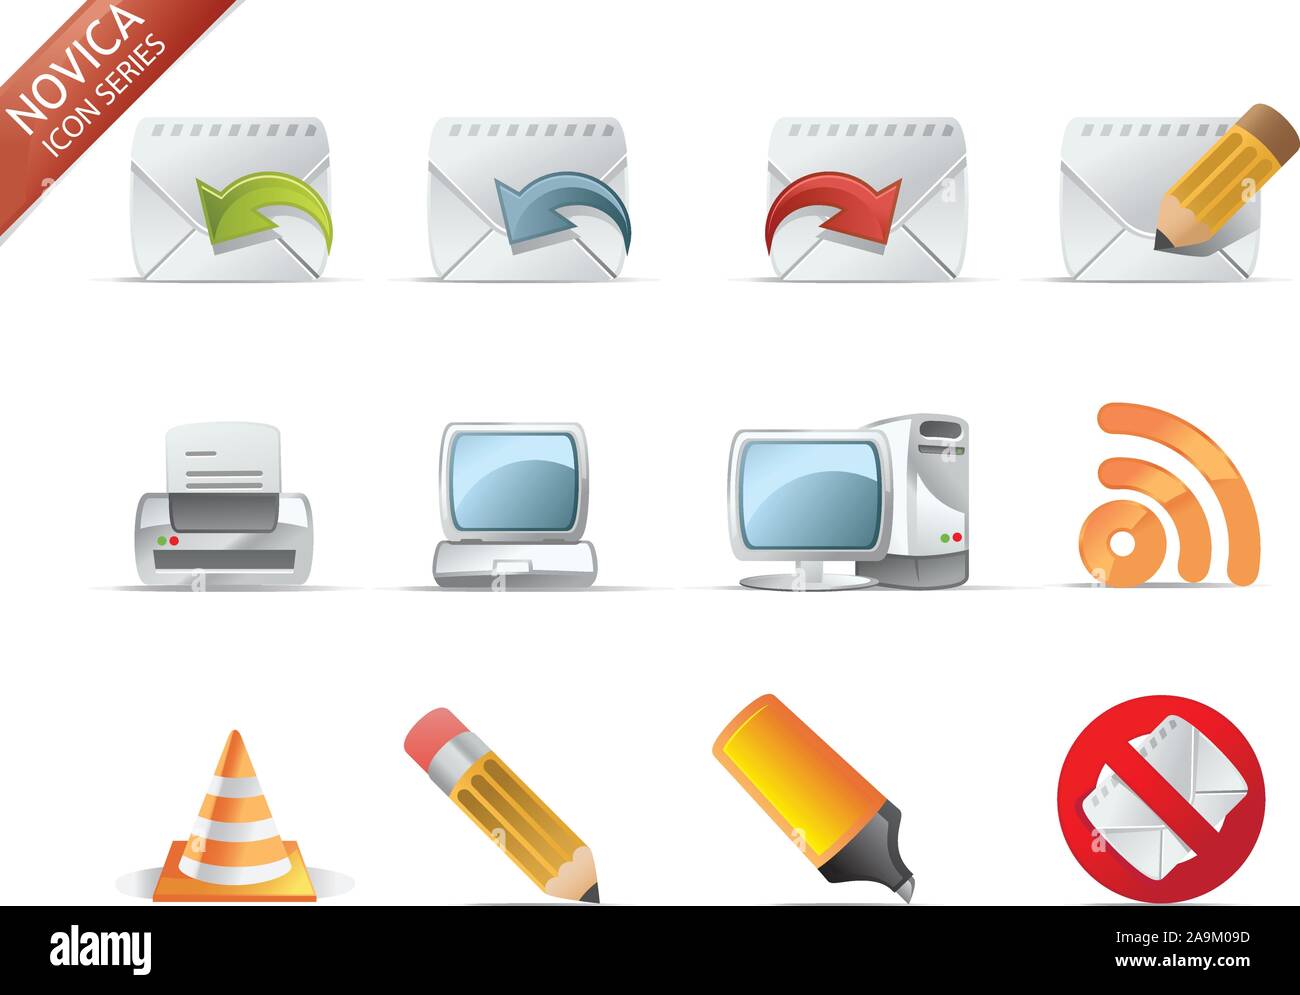 Web and Internet Icons for your website, internet, presentation and application project. web 2.0 style, clean and professional. see more icons in my p Stock Vector